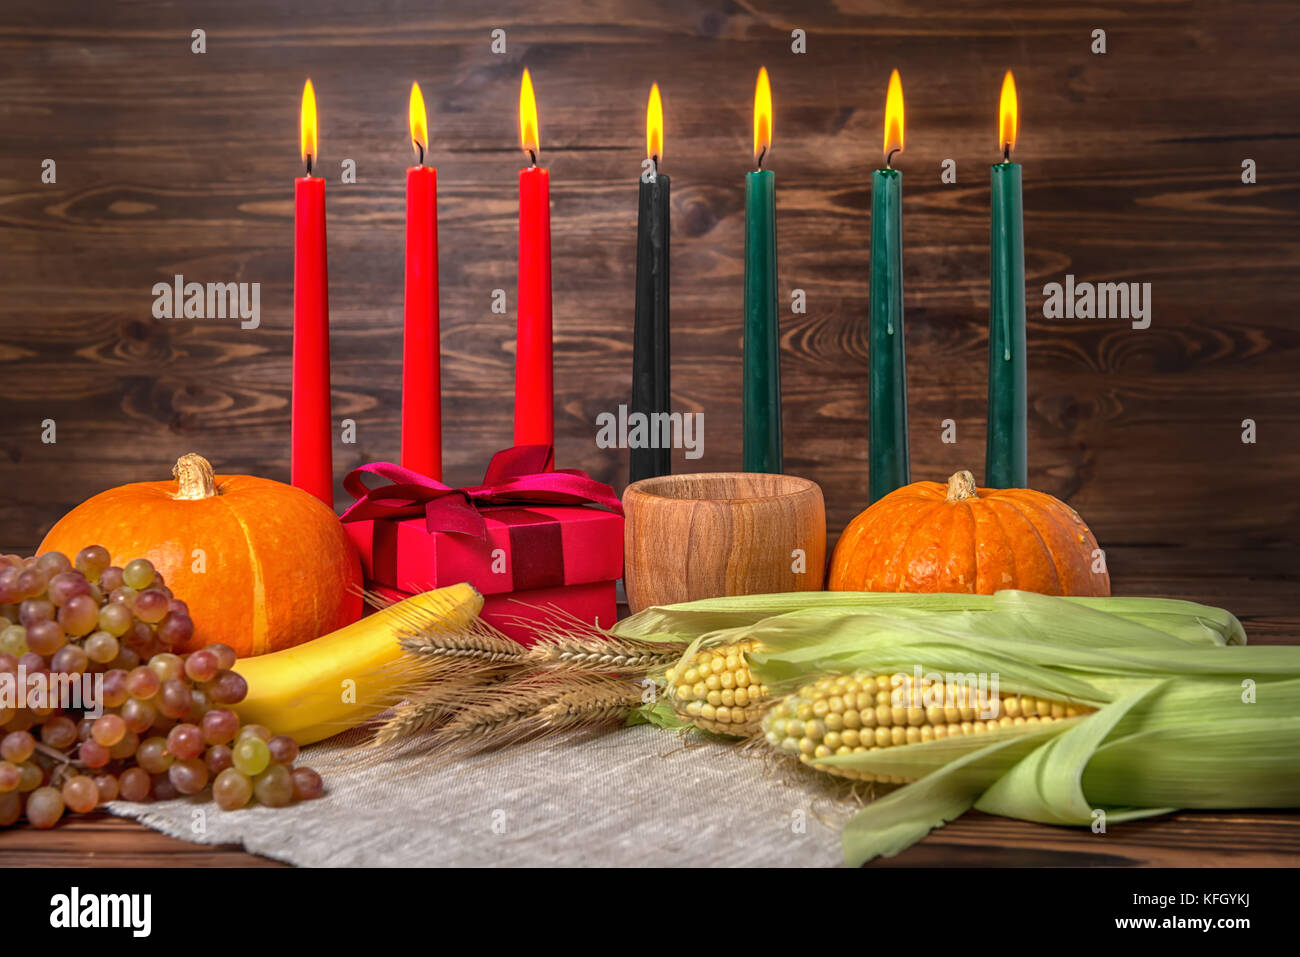 Kwanzaa background hi-res stock photography and images - Page 3